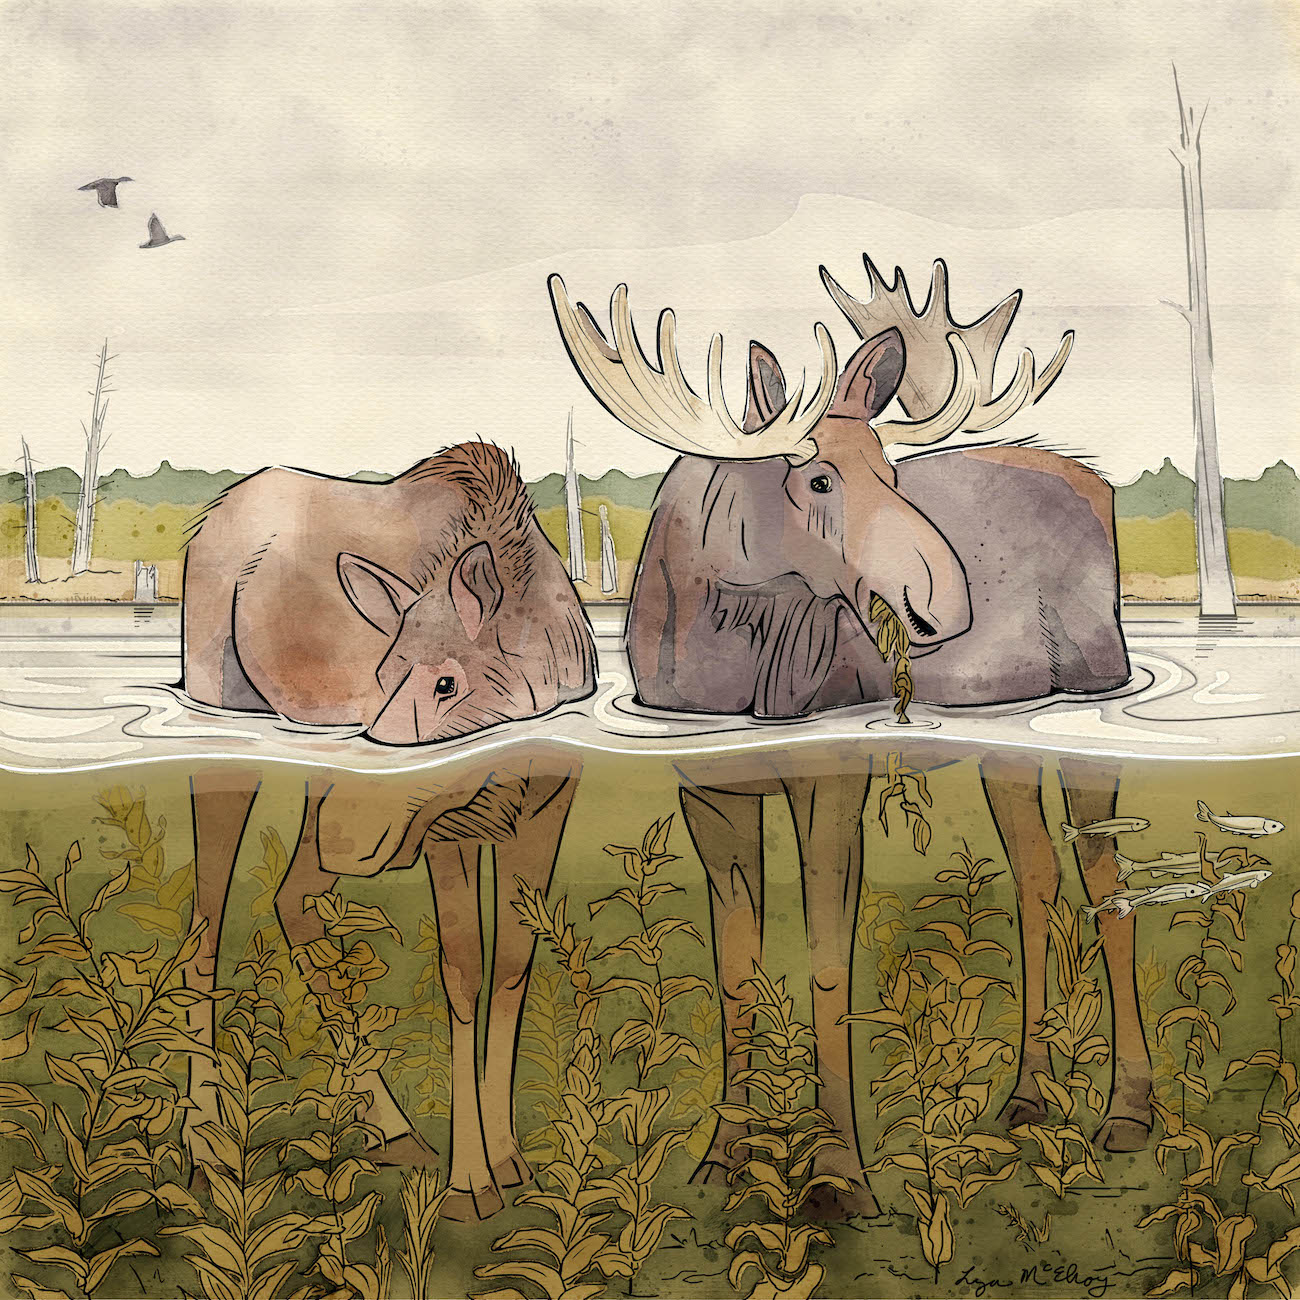 An colored sketch shows a bull and cow moose standing in a pond with weeds growing underwater.